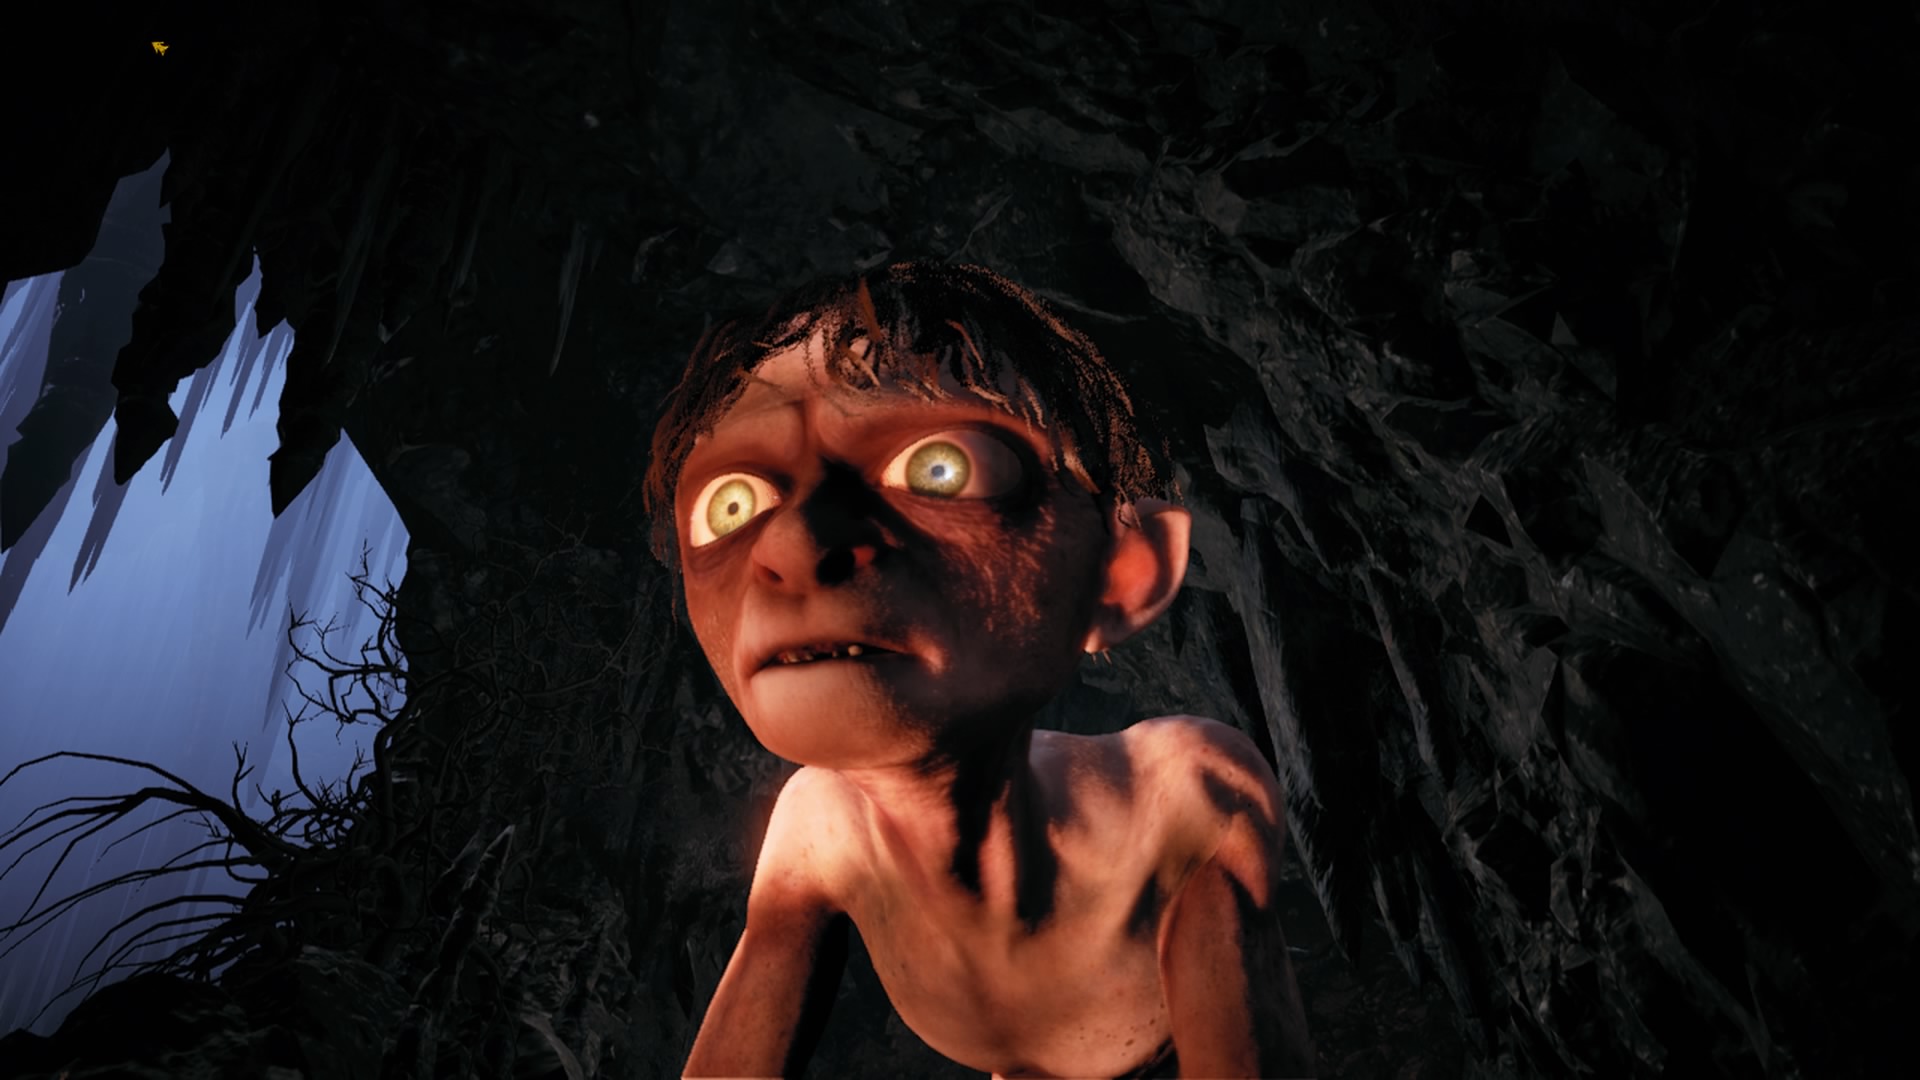 Gollum looks around; where are the buttholes?